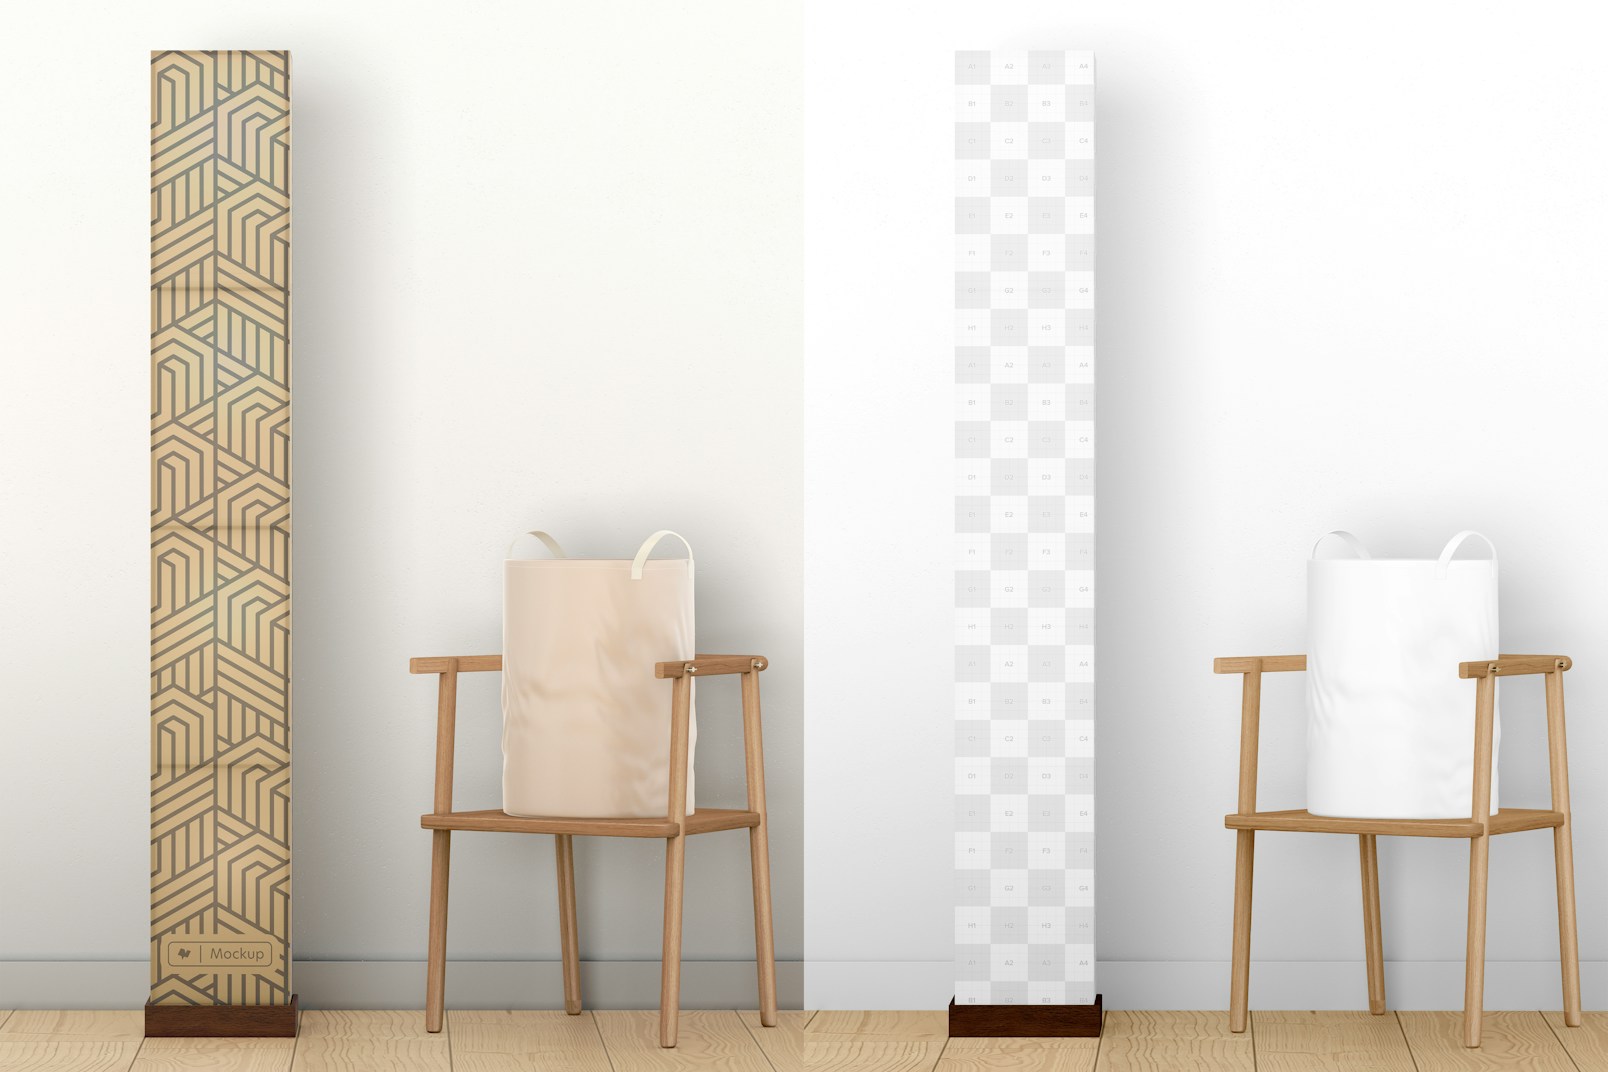 Paper Tower Lamp with Wooden Chair Mockup